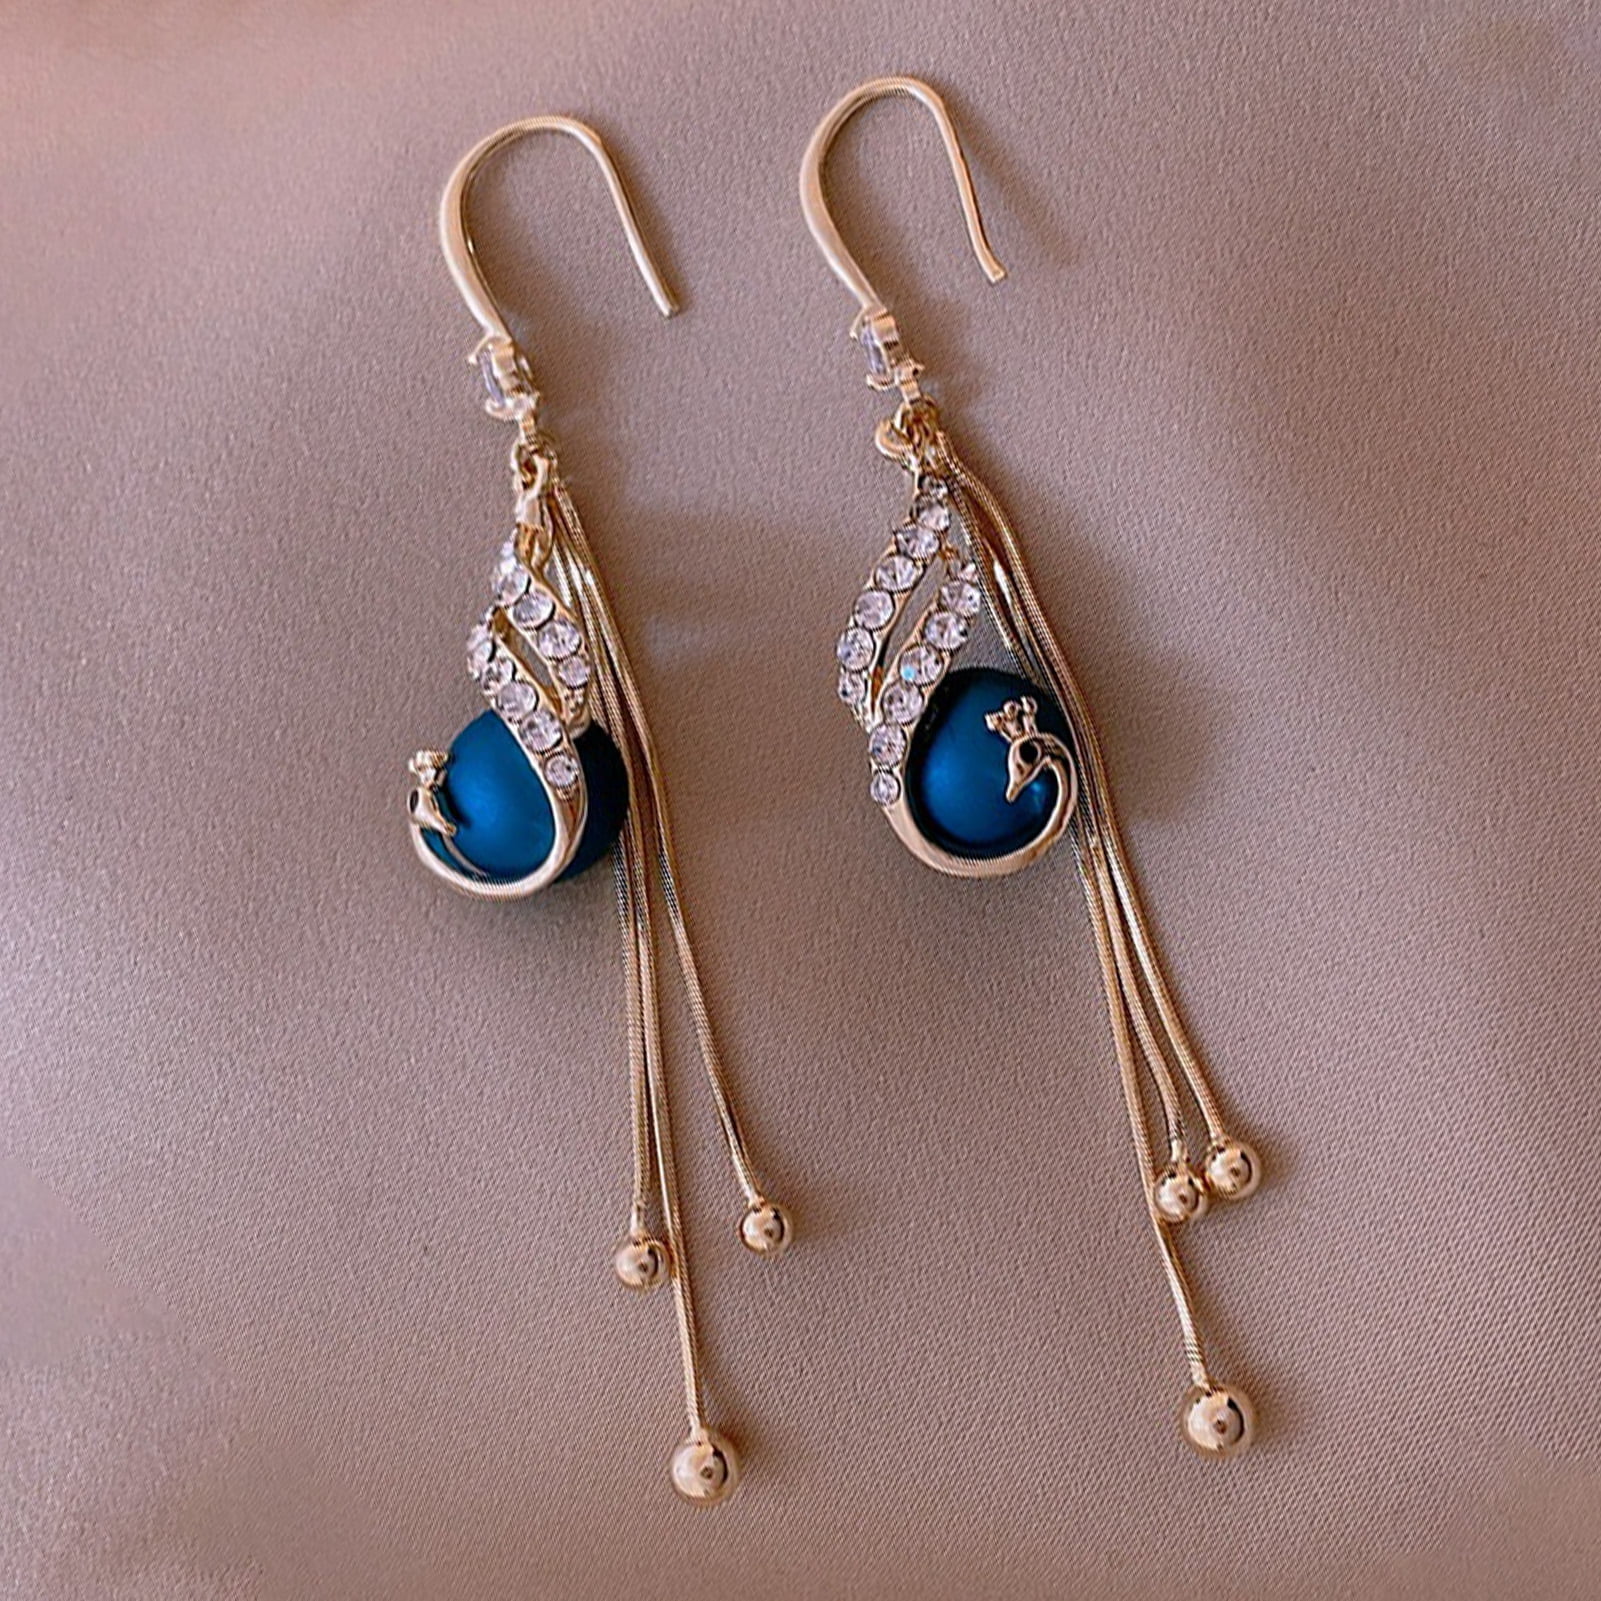 Details about   Gold Plated 925 Silver Textured Blue Chalcedony Gemstone Dangle Earrings 